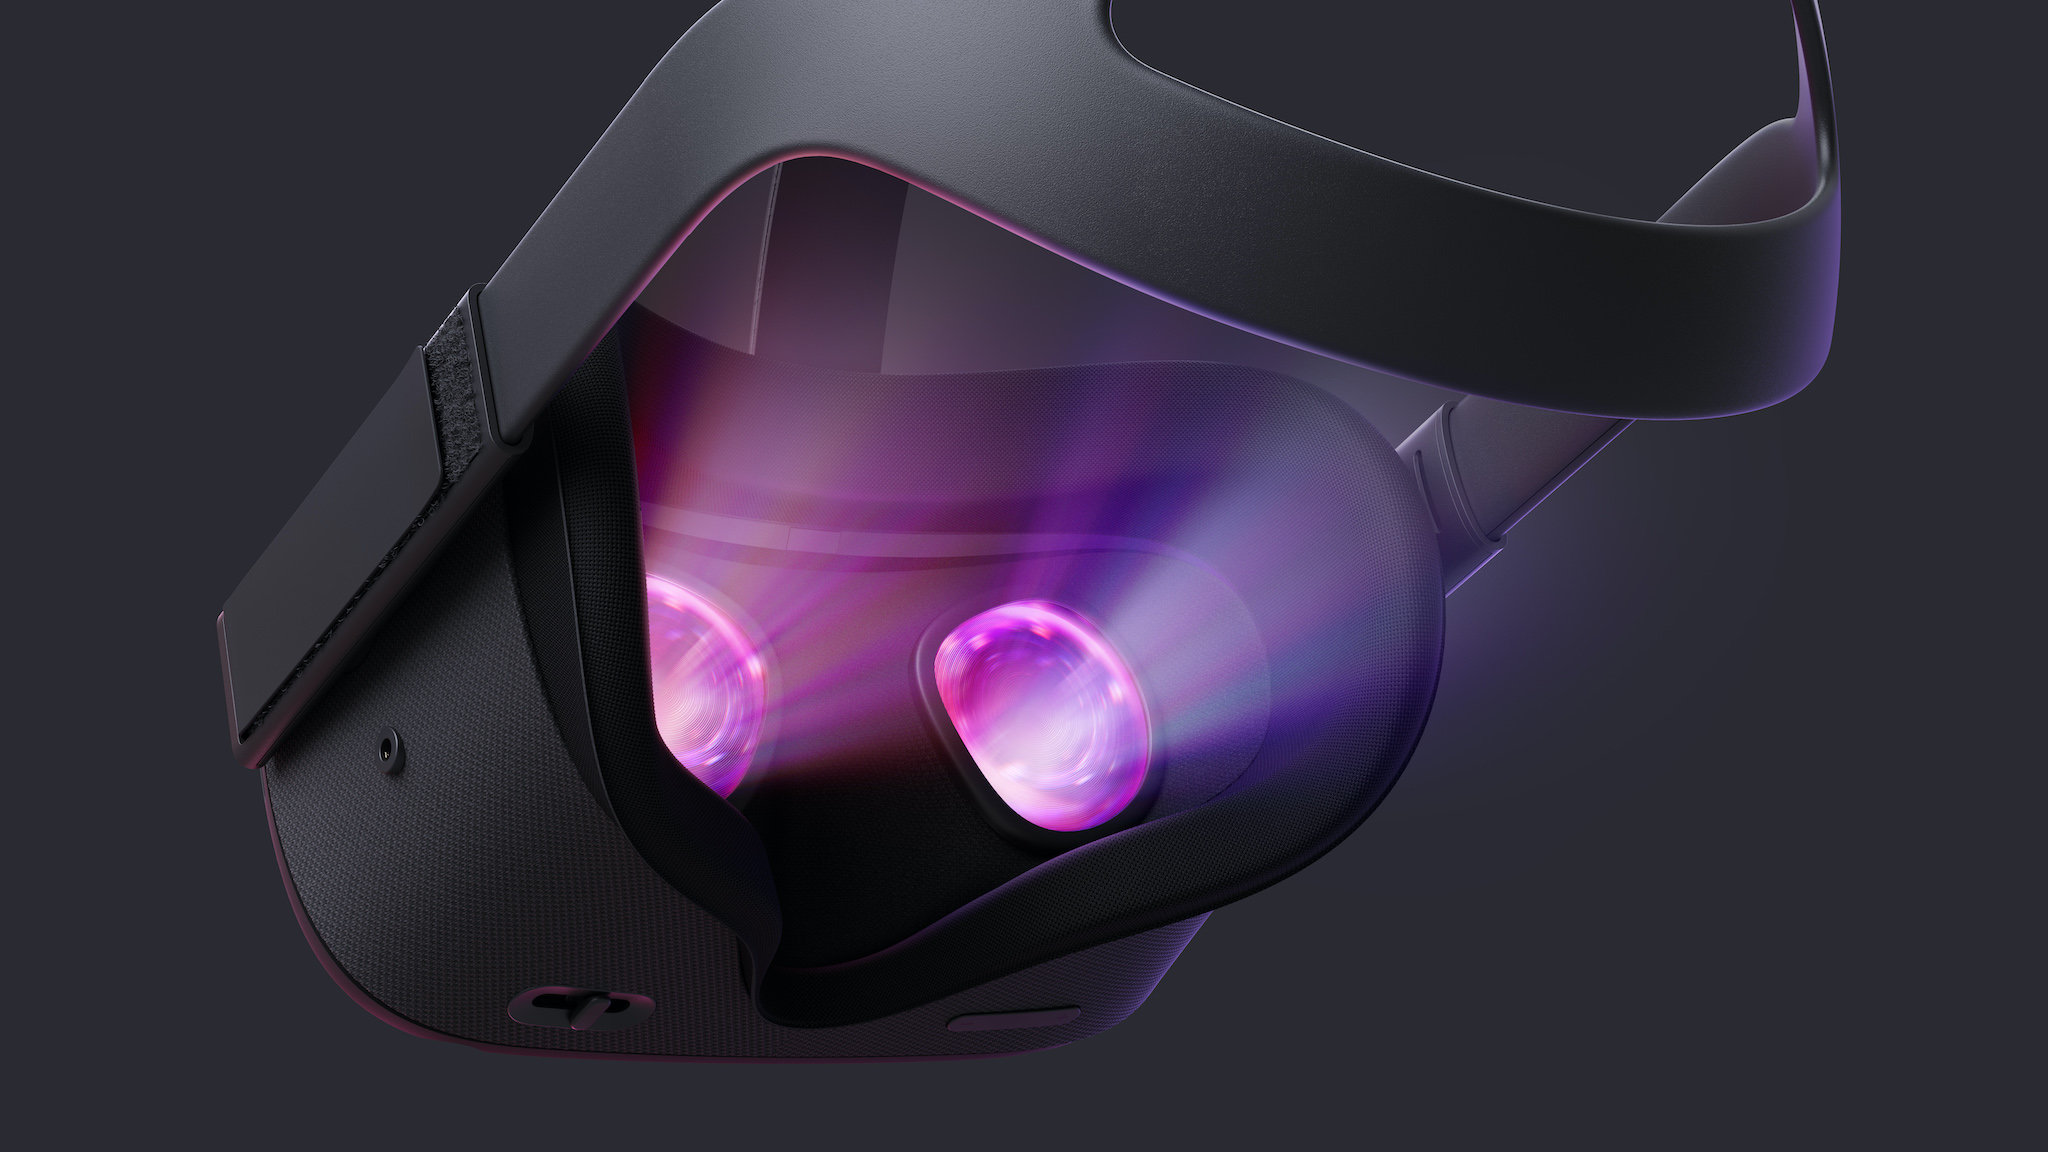 A Year After Launch Oculus Says Quest Is Starting Vr Revolution